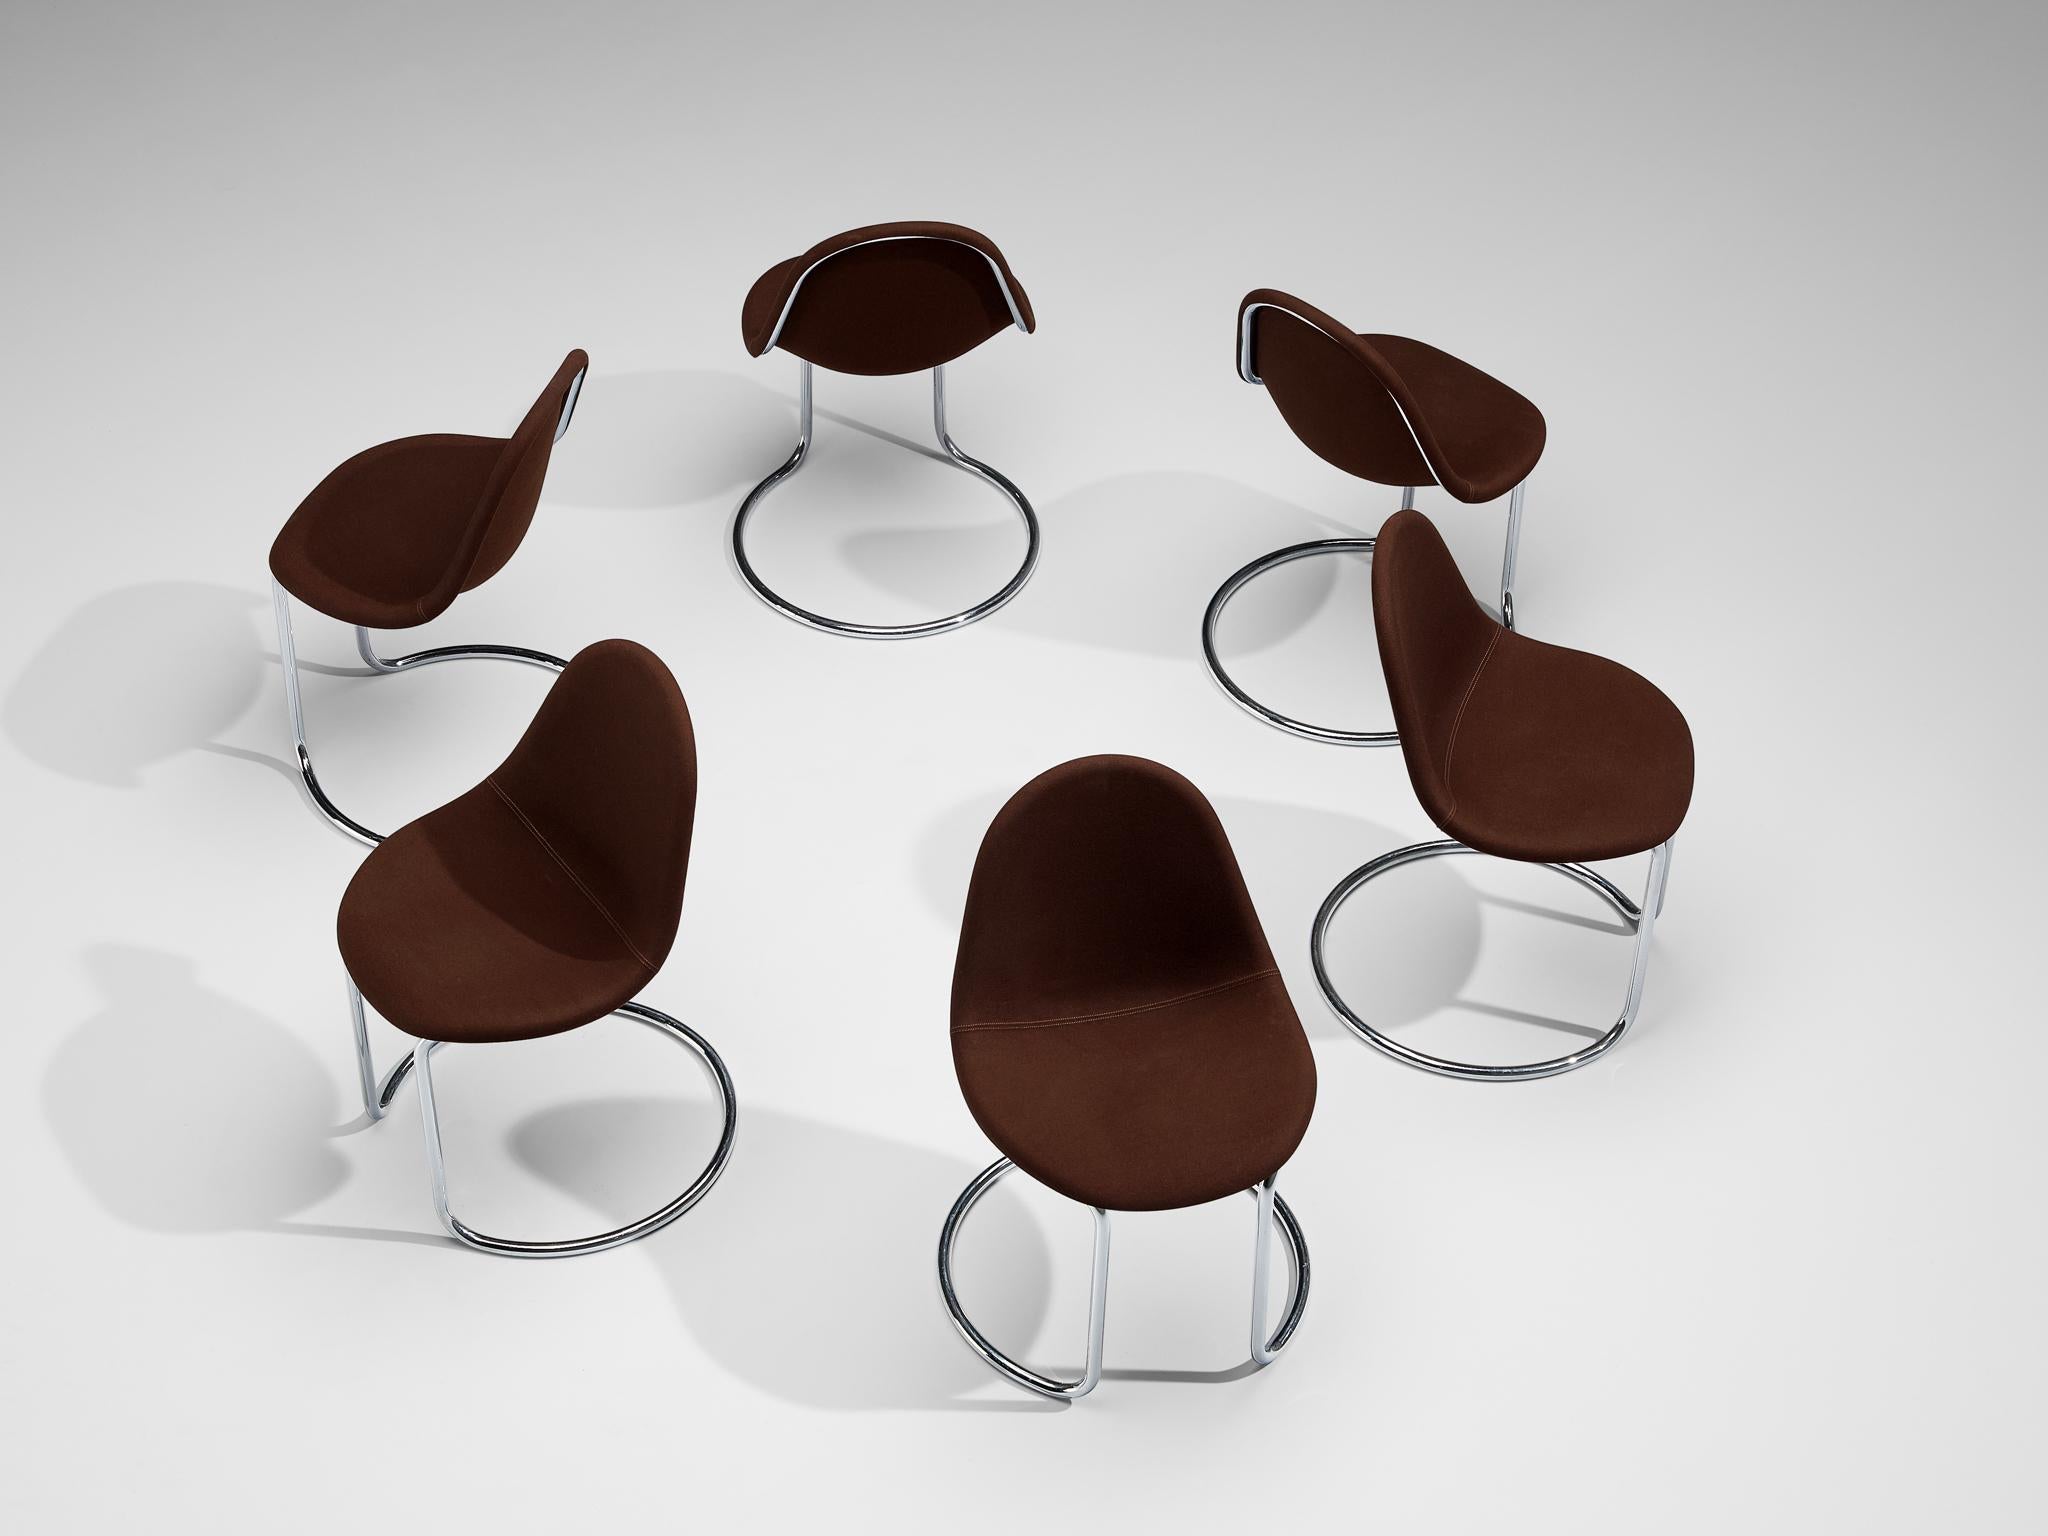 Giotto Stoppino for Bernini, set of six 'Maya' chairs, fabric, chromed steel, Italy, 1969

A set of six 'Maya' chairs by Italian designer Giotto Stoppino, manufactured by Bernini. The chairs feature an organic shaped seat upholstered in a brown